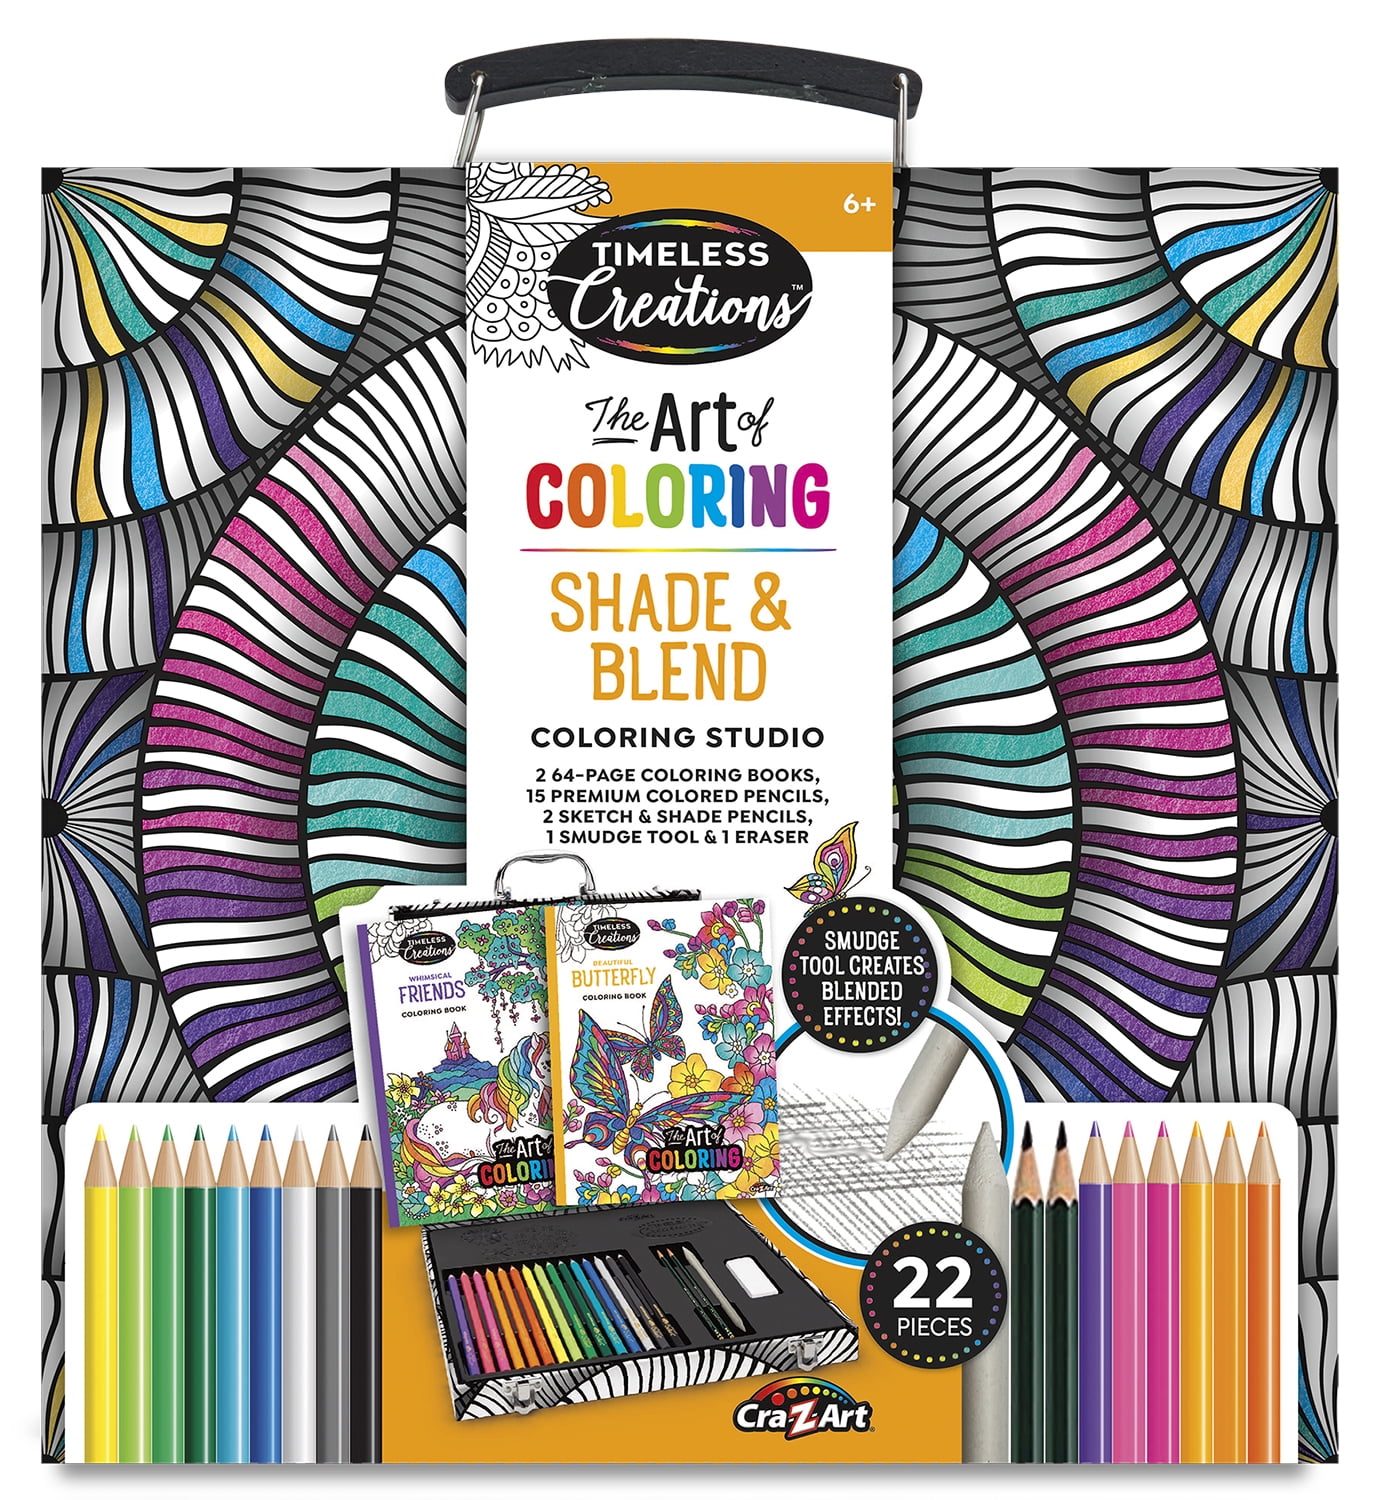 TIMELESS CREATIONS ADULT COLORING ART KIT - The Toy Insider